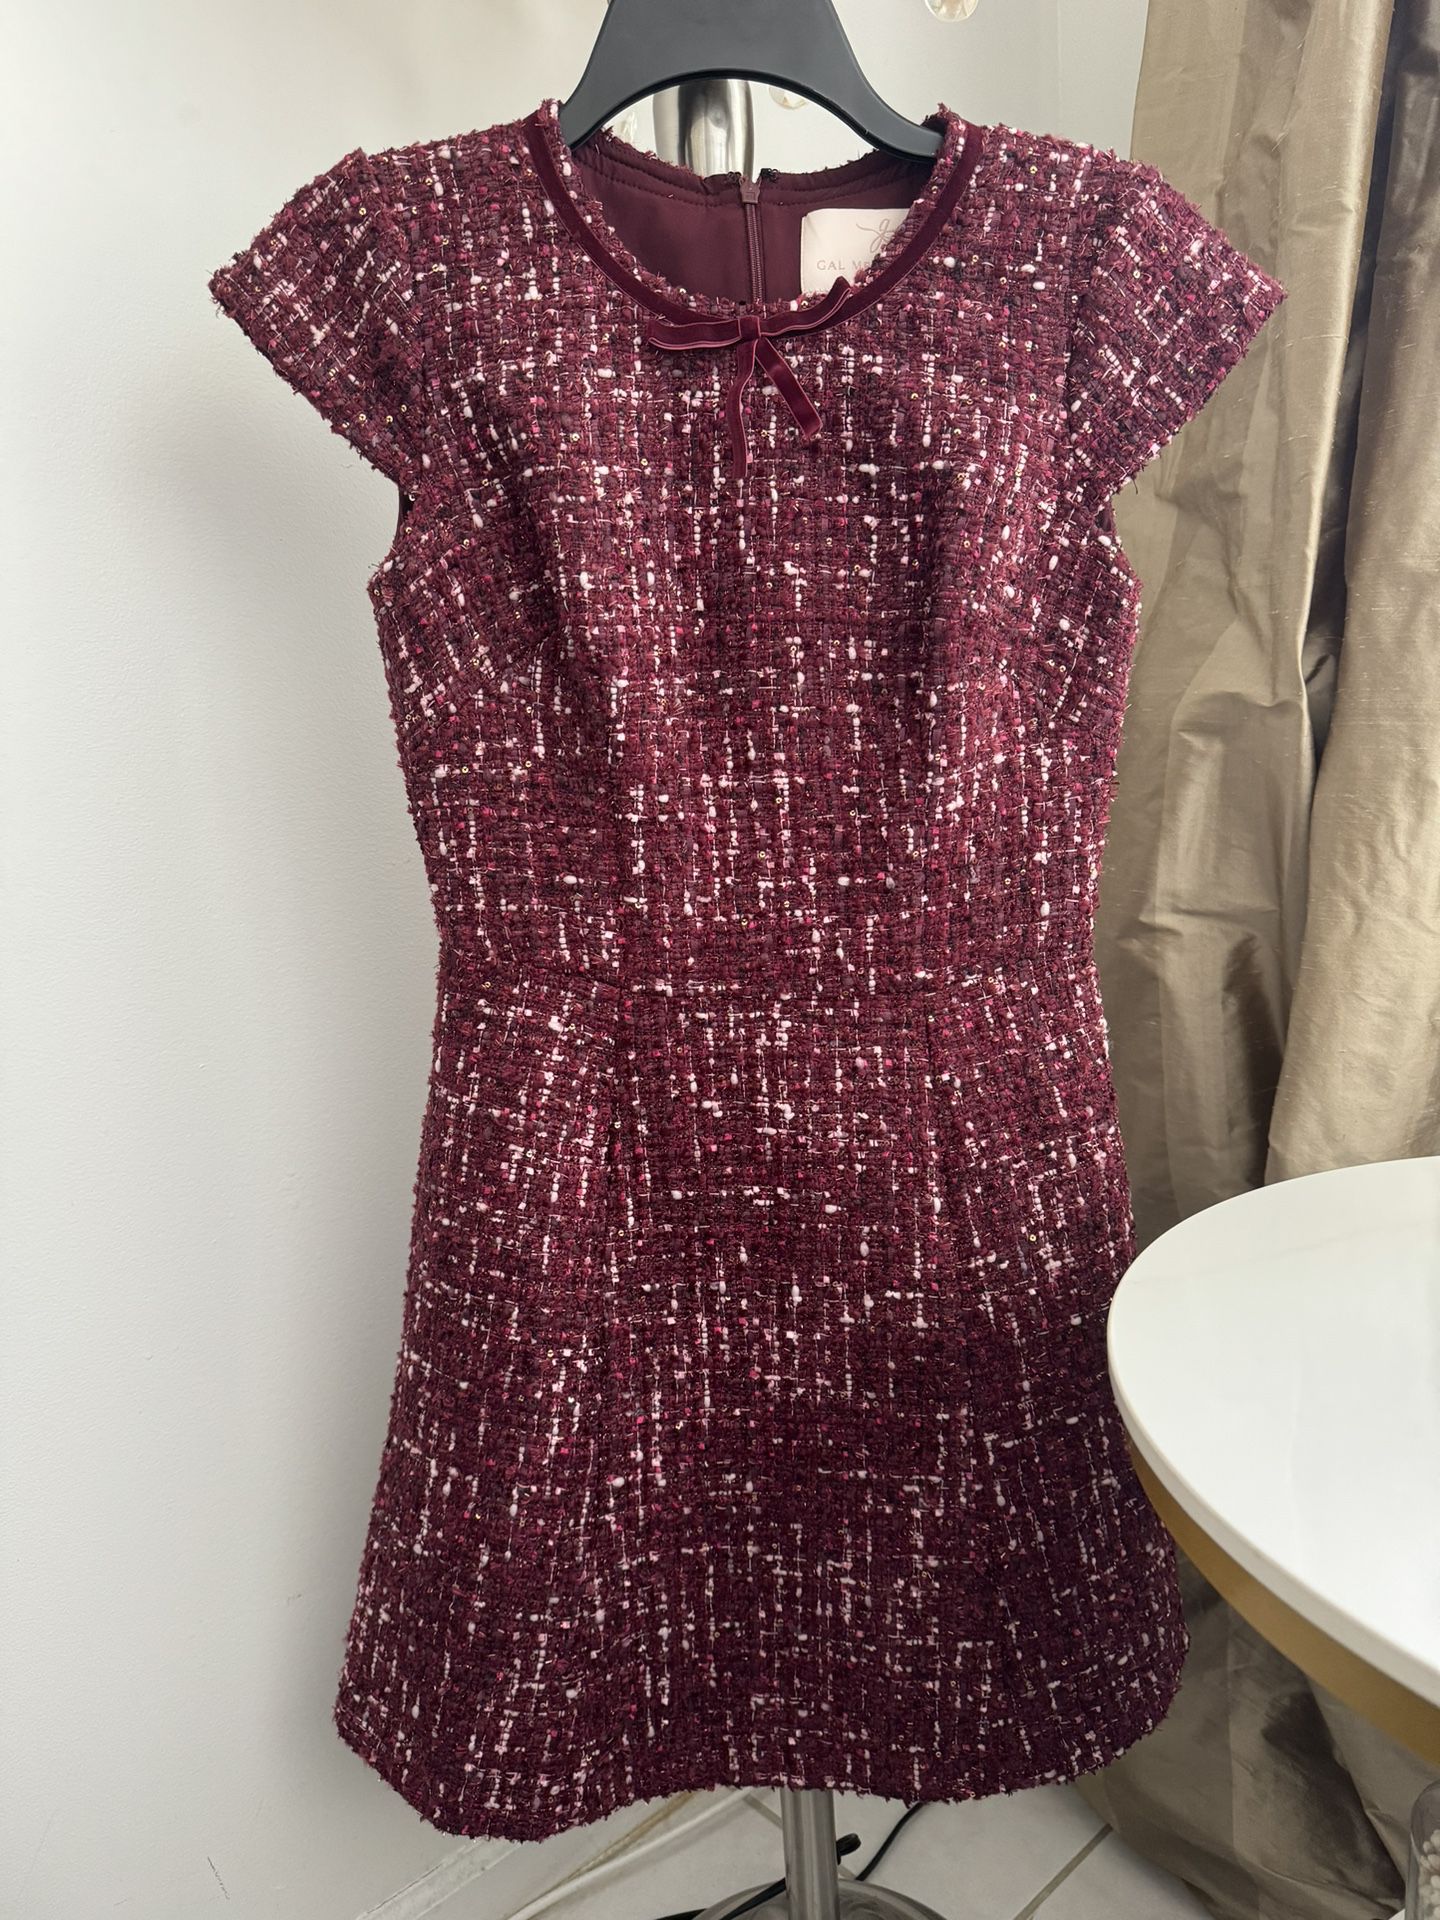 Gall Meets Glam Burgundy Fit and Flare Dress Size 0